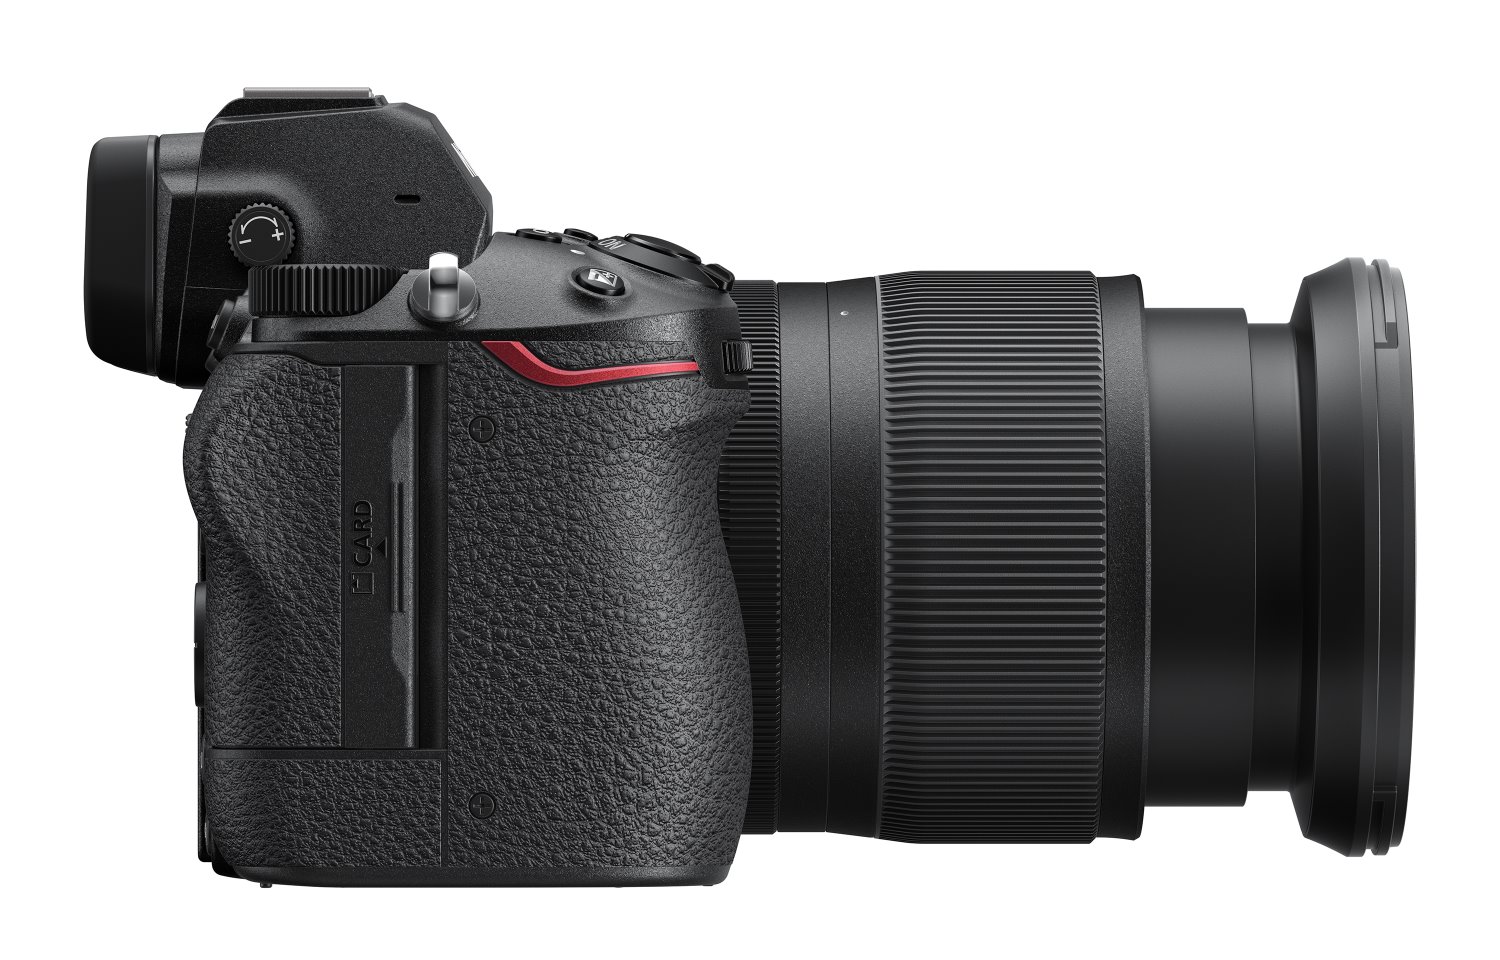 The Nikon Z8 May Be Announced Next Month